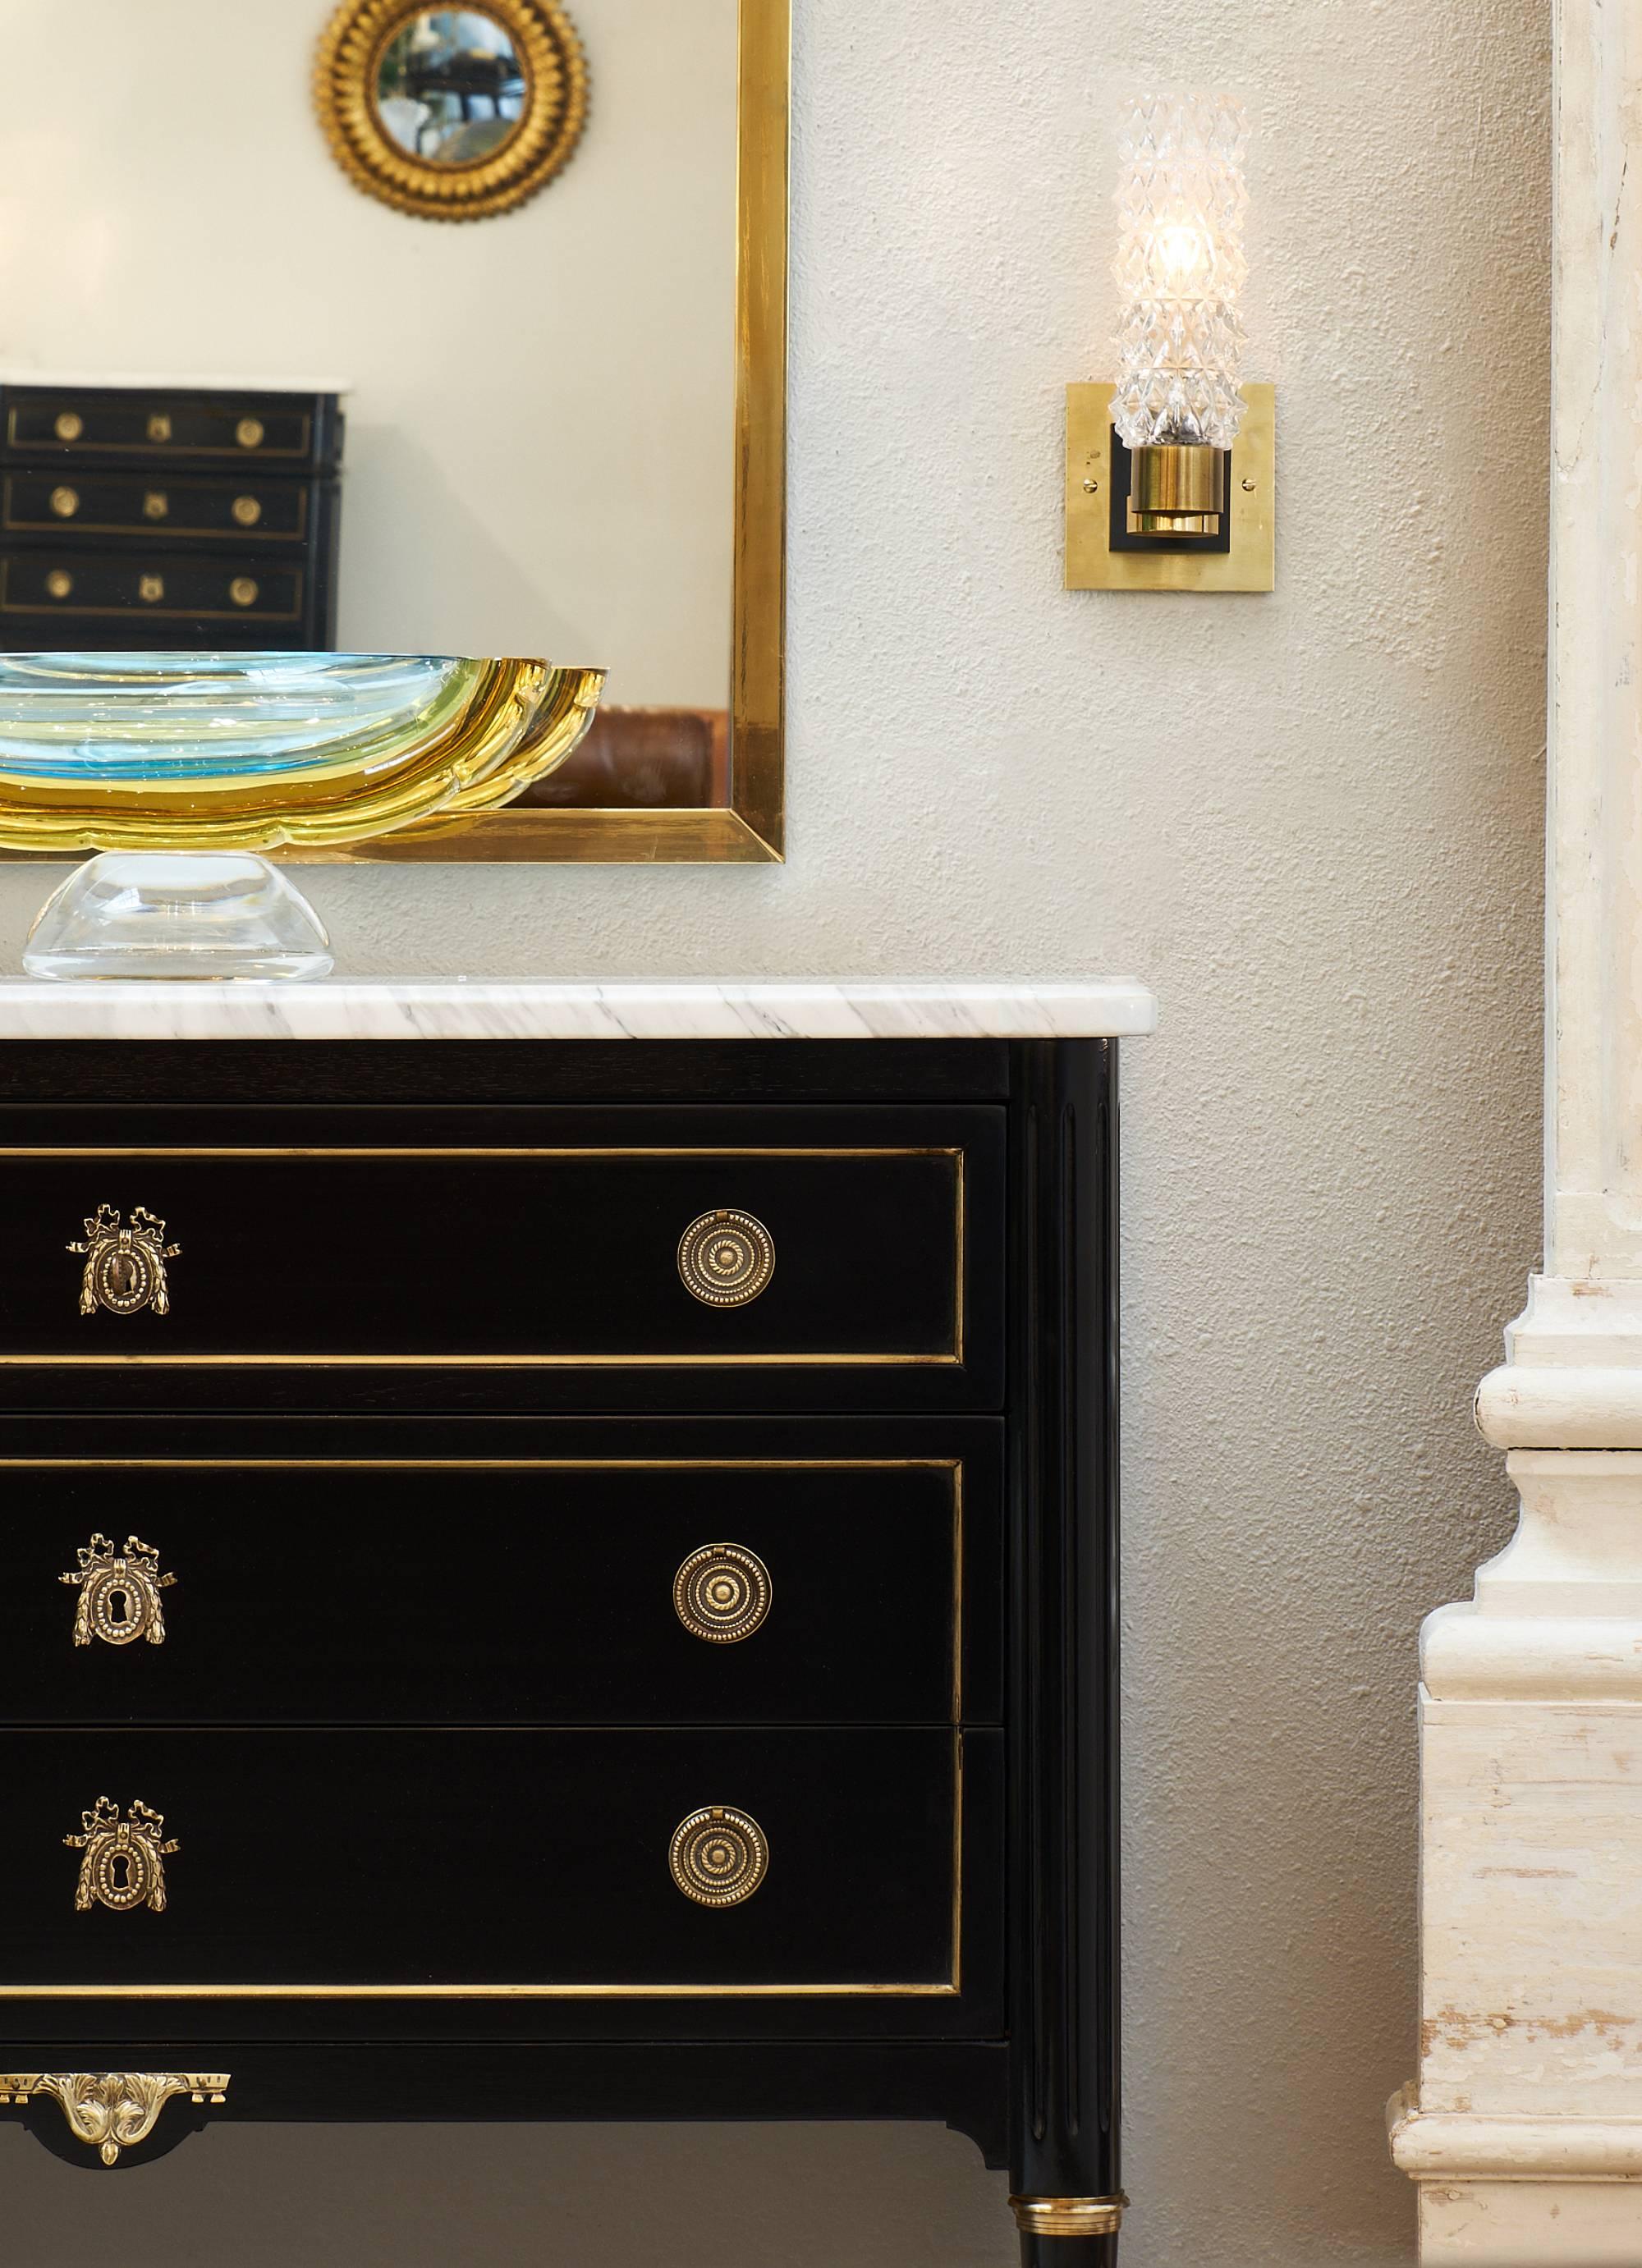 Lovely and fine chest of drawers featuring three dovetailed drawers and a richly veined Carrara marble top. The wonderful piece has gilt trim throughout and finely cast bronze hardware, ormolu details, and fluted legs. This is the perfect occasional